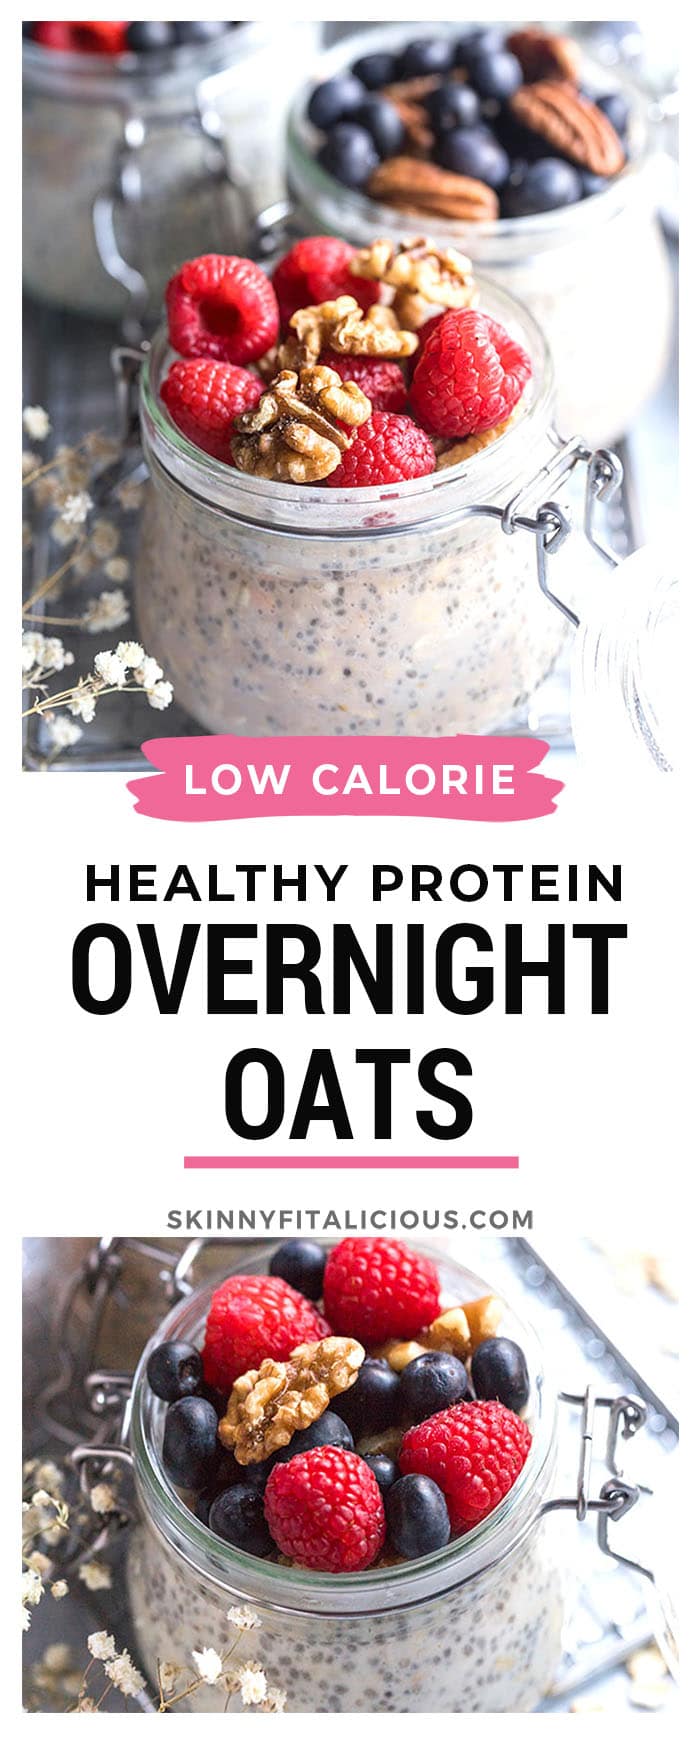 Healthy Protein Overnight Oats is a low calorie breakfast recipe that's simple to make for a delicious protein breakfast on the go!